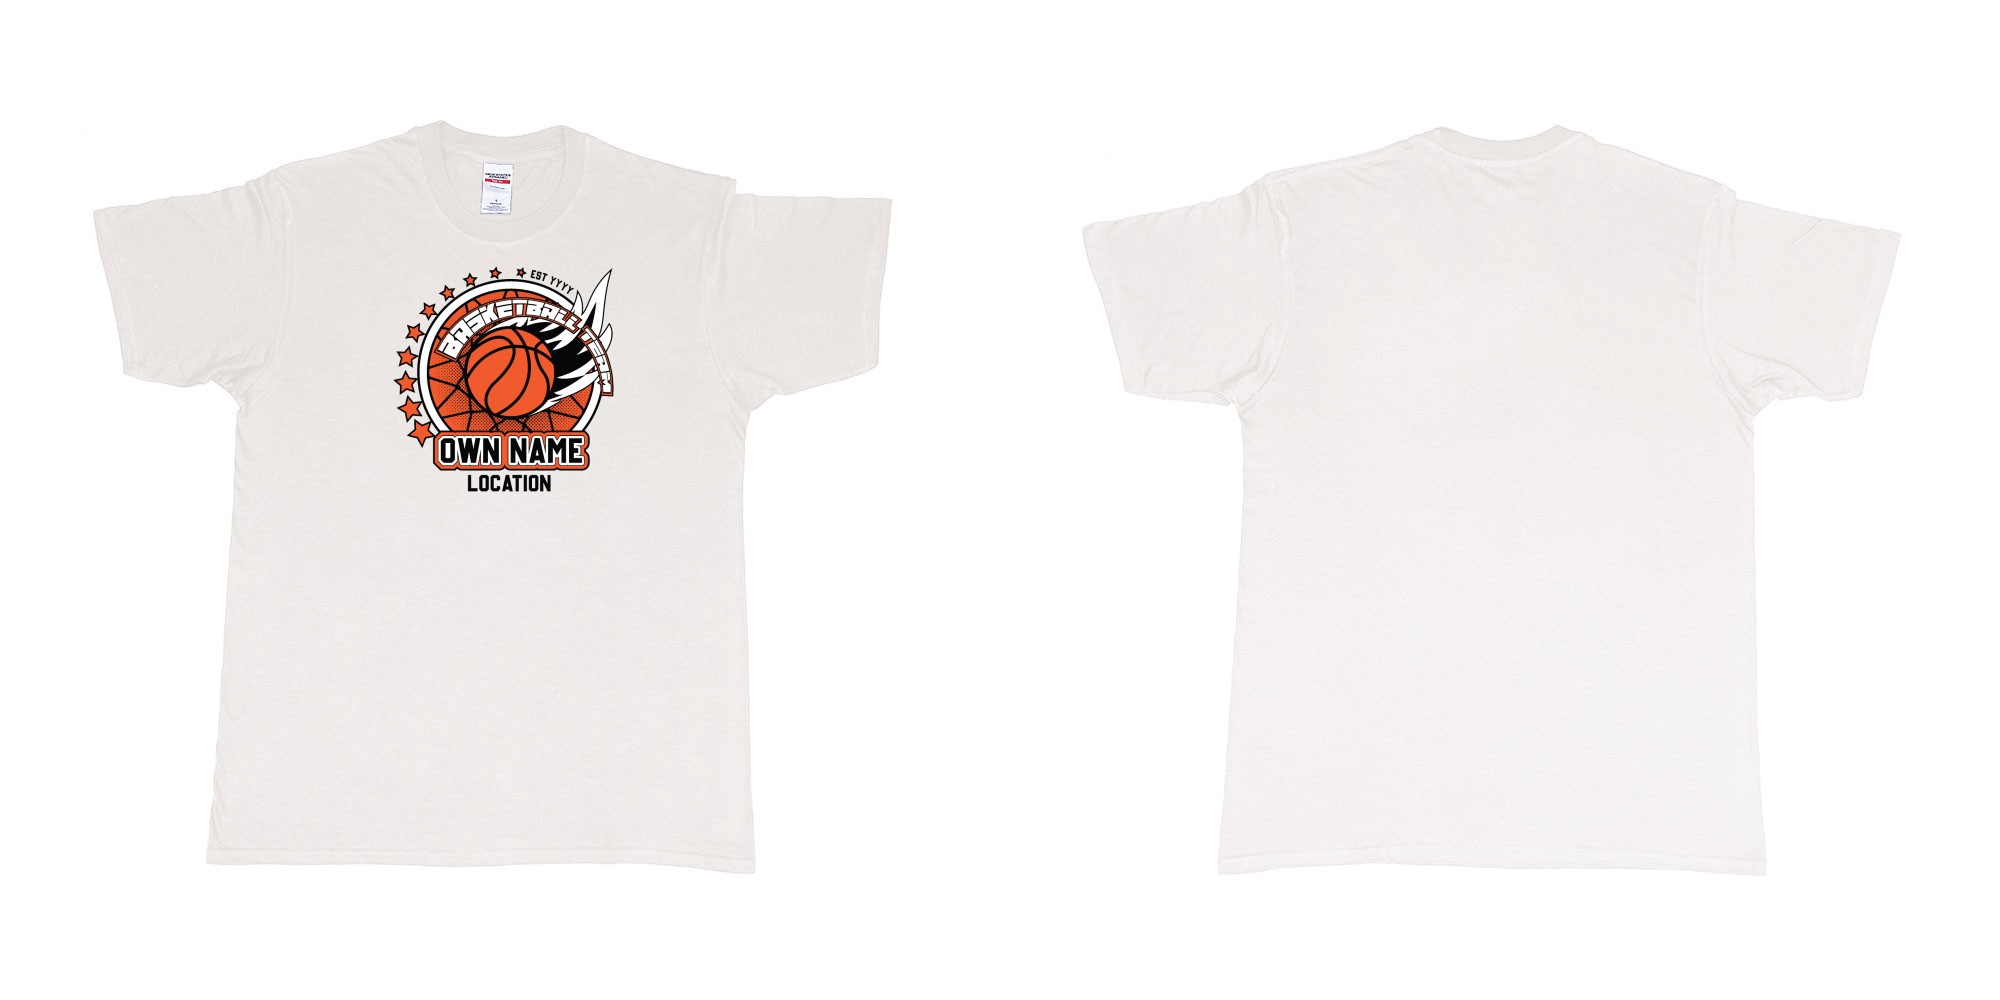 Custom tshirt design basketball team own name location established year custom design production bali in fabric color white choice your own text made in Bali by The Pirate Way